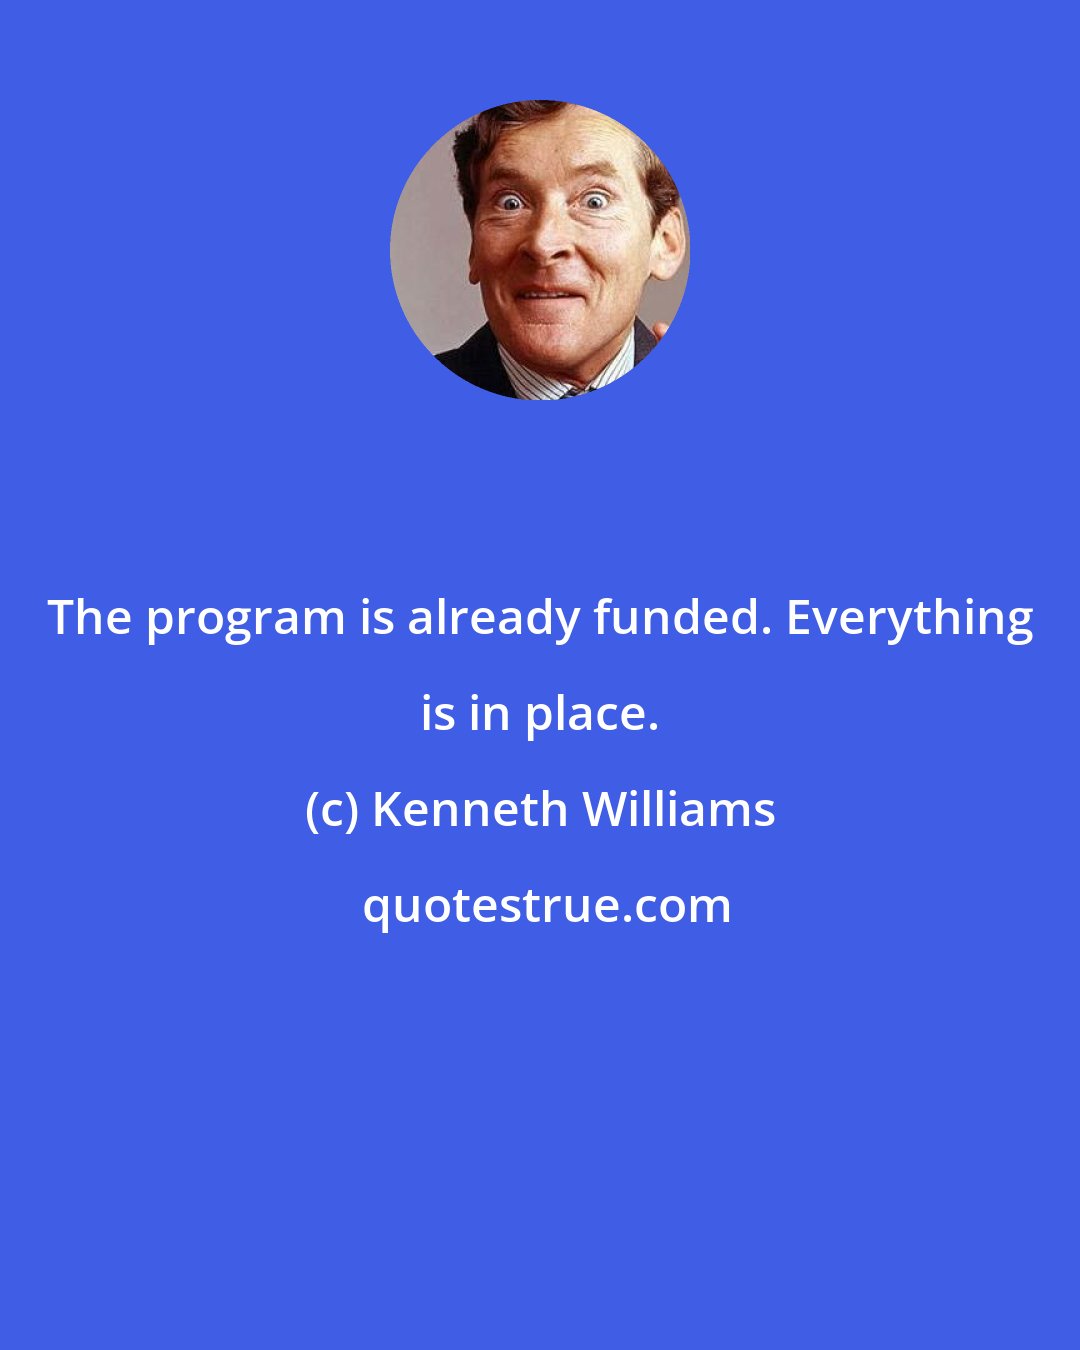 Kenneth Williams: The program is already funded. Everything is in place.